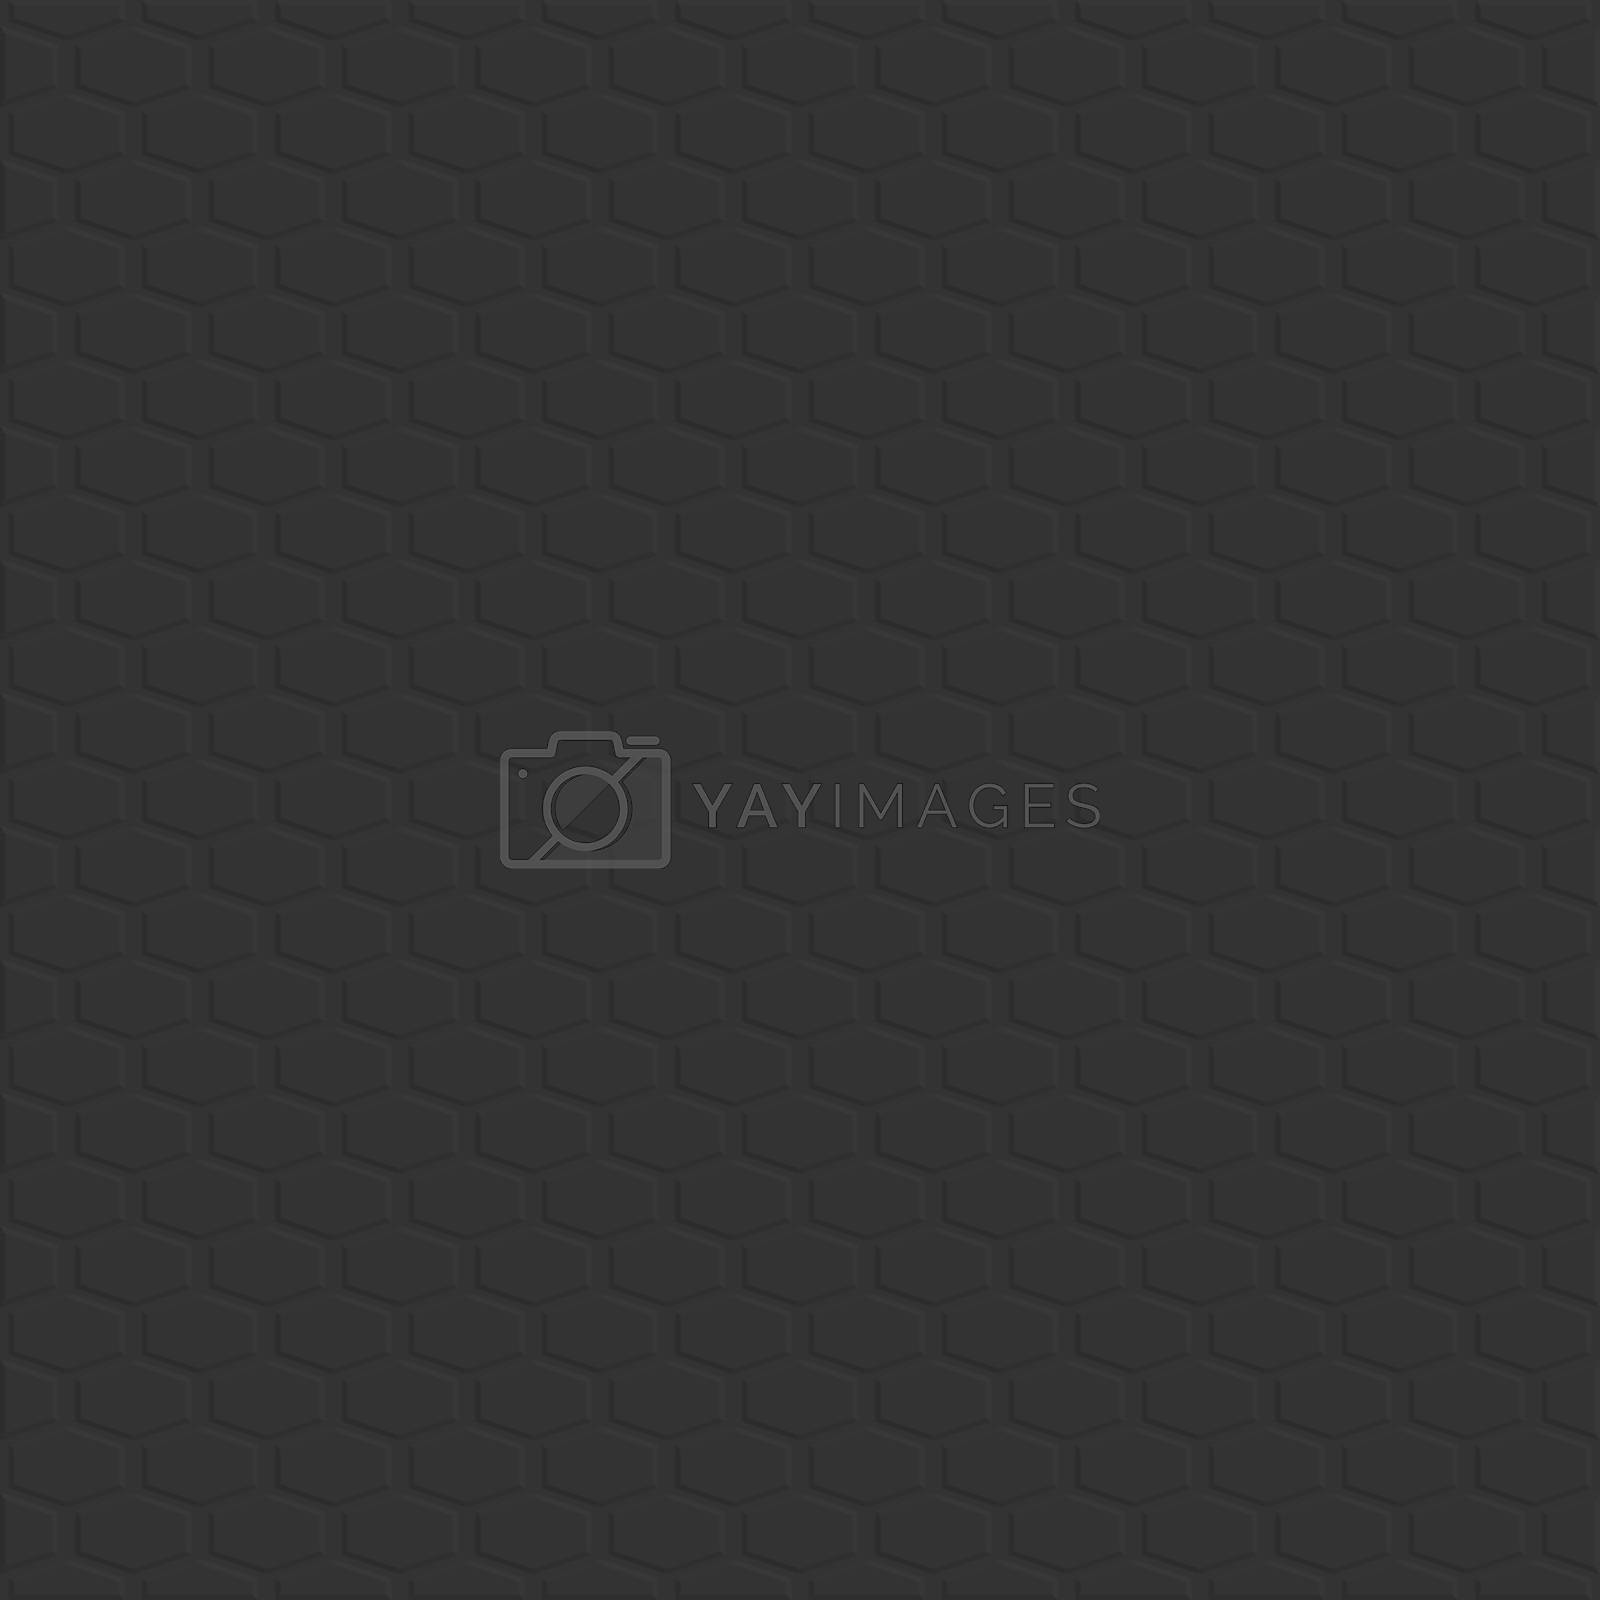 Royalty free image of Geometric seamless grating background, vector illustration. by kup1984